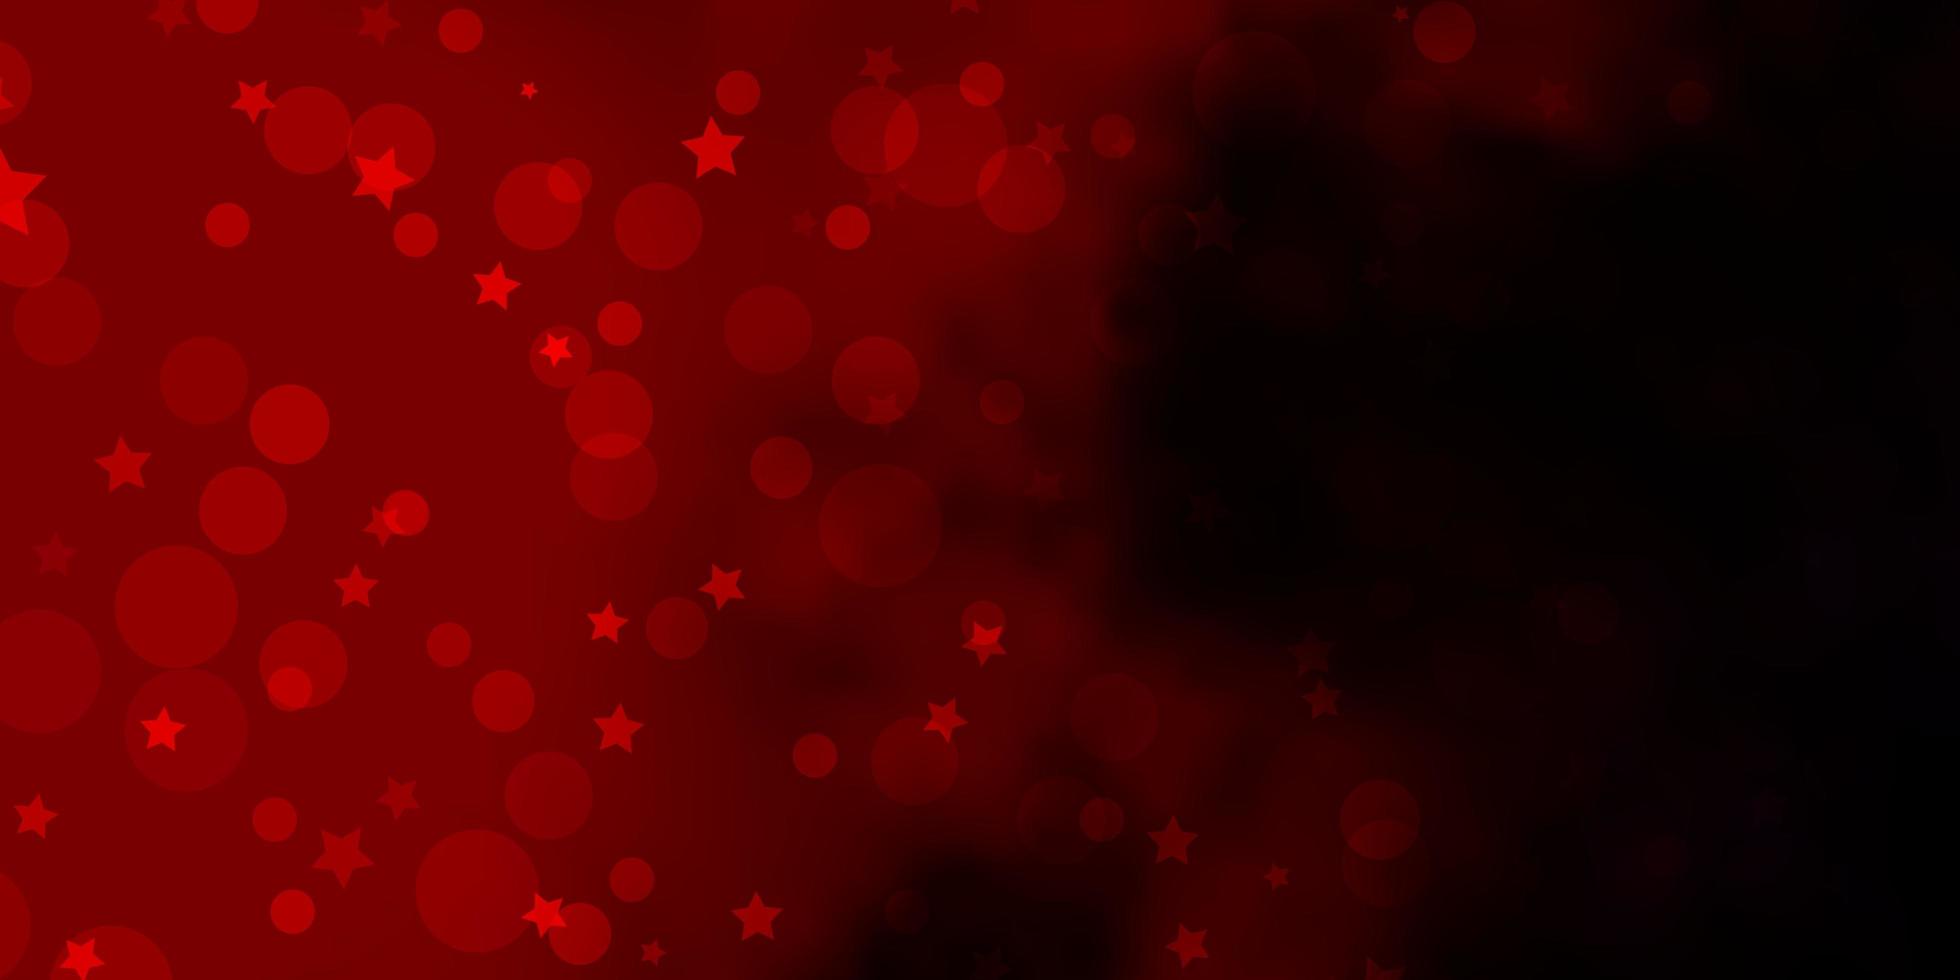 Dark Red vector background with circles, stars. Abstract illustration with colorful shapes of circles, stars. Texture for window blinds, curtains.